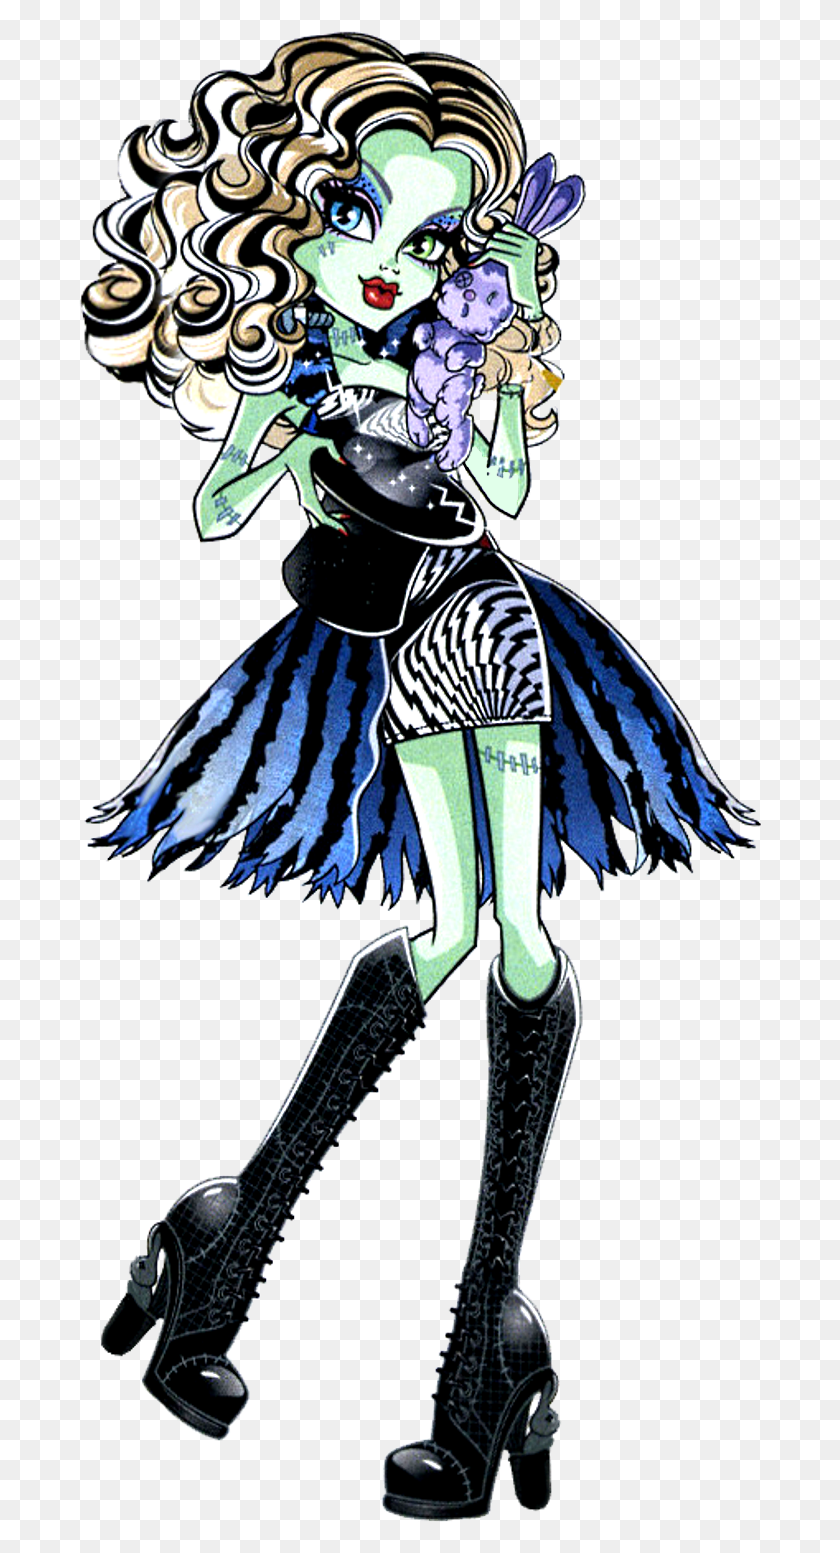 684x1493 Frankie Stein Monster High Freak Du Chic Frankie, Persona, Humano, Ropa Hd Png